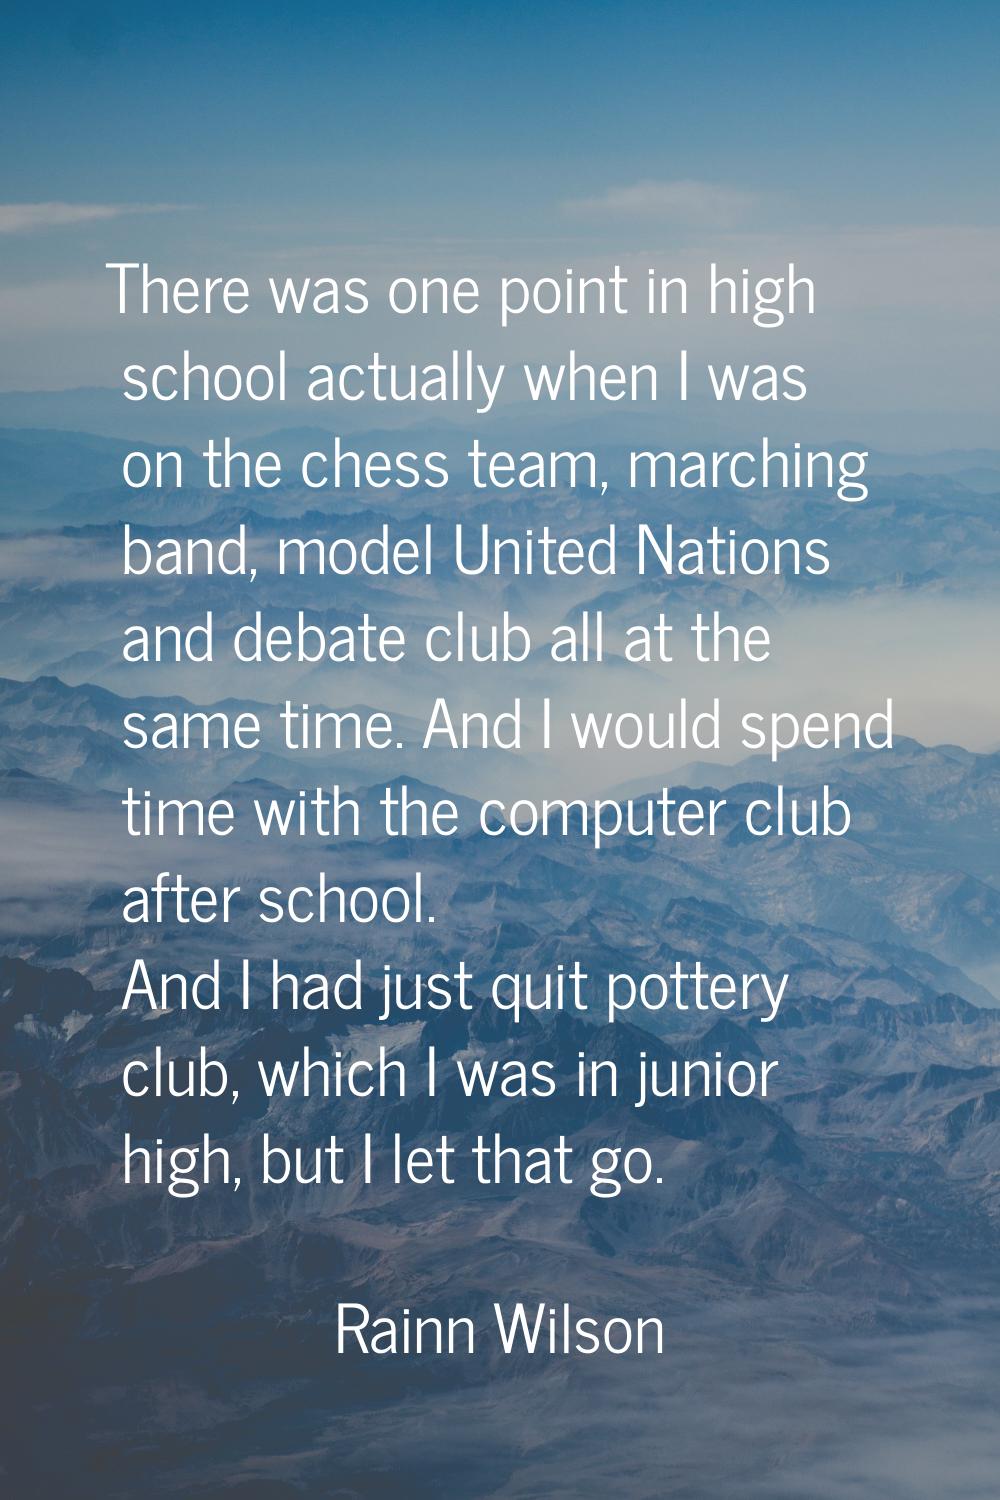 There was one point in high school actually when I was on the chess team, marching band, model Unit